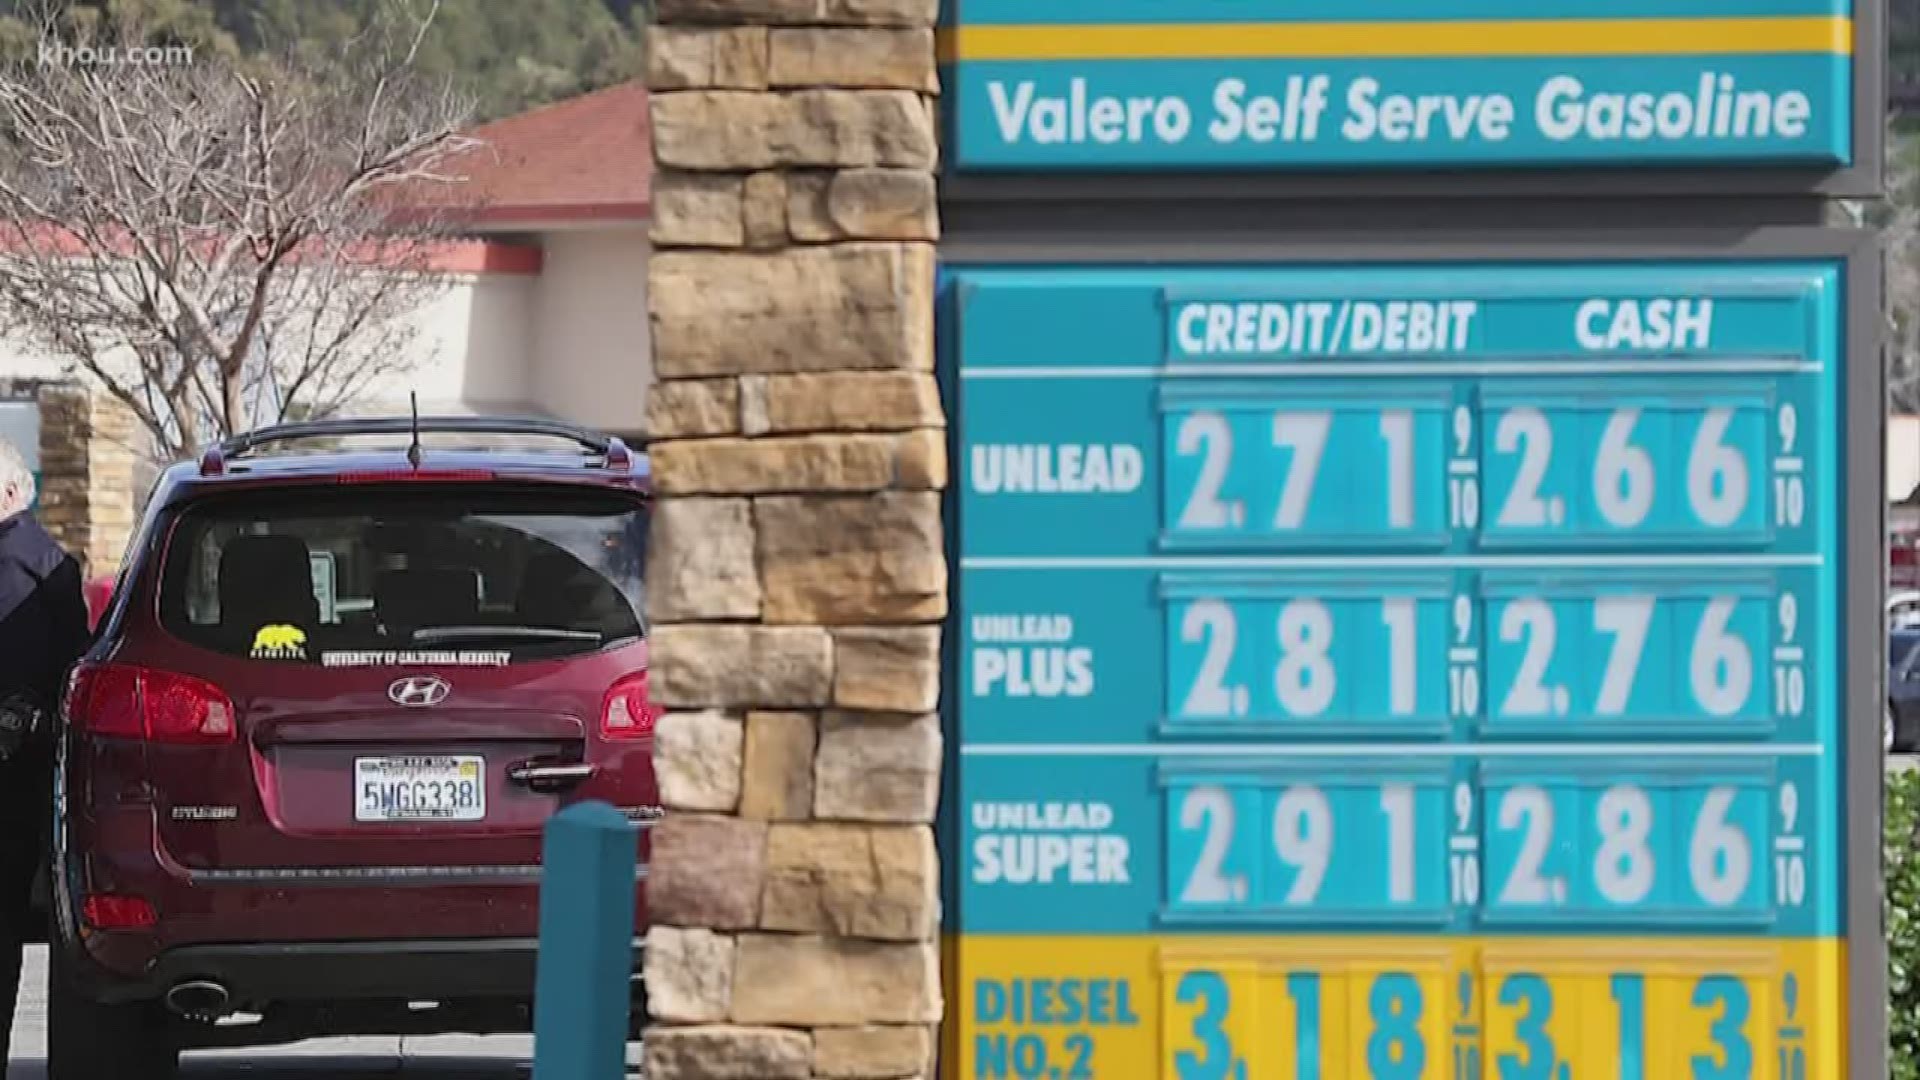 A KHOU 11 viewer wanted to know if it is illegal to charge you more for gas when you pay with your credit card.